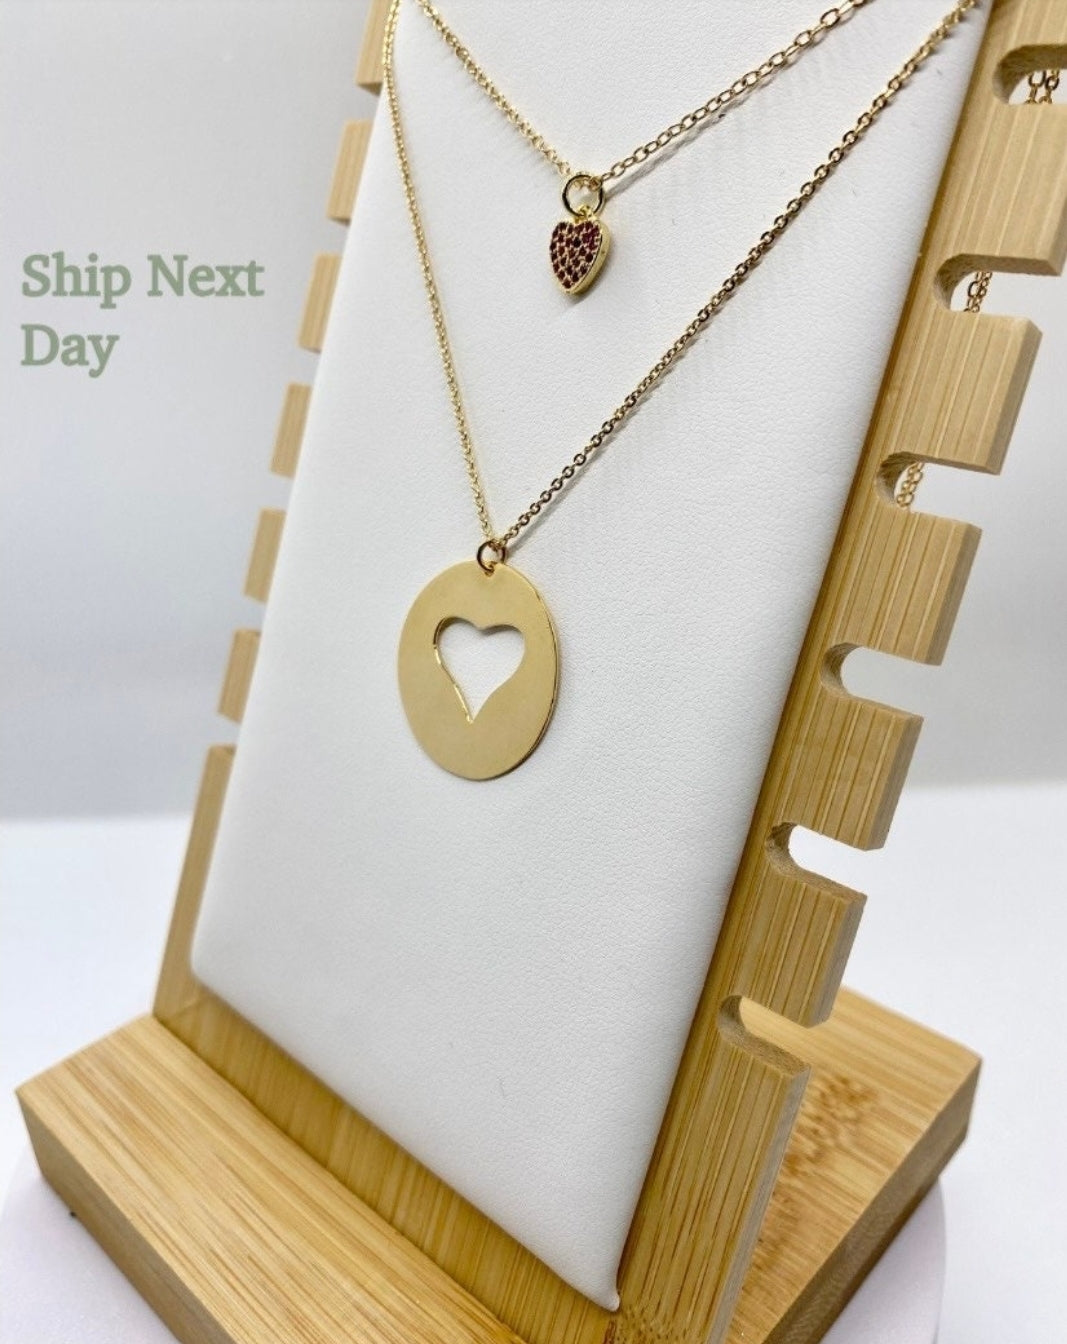 Necklace My perfect complement. Handmade Jewelry. Heart Necklace. Gold Plated. Mom’s Gift. Gift for her